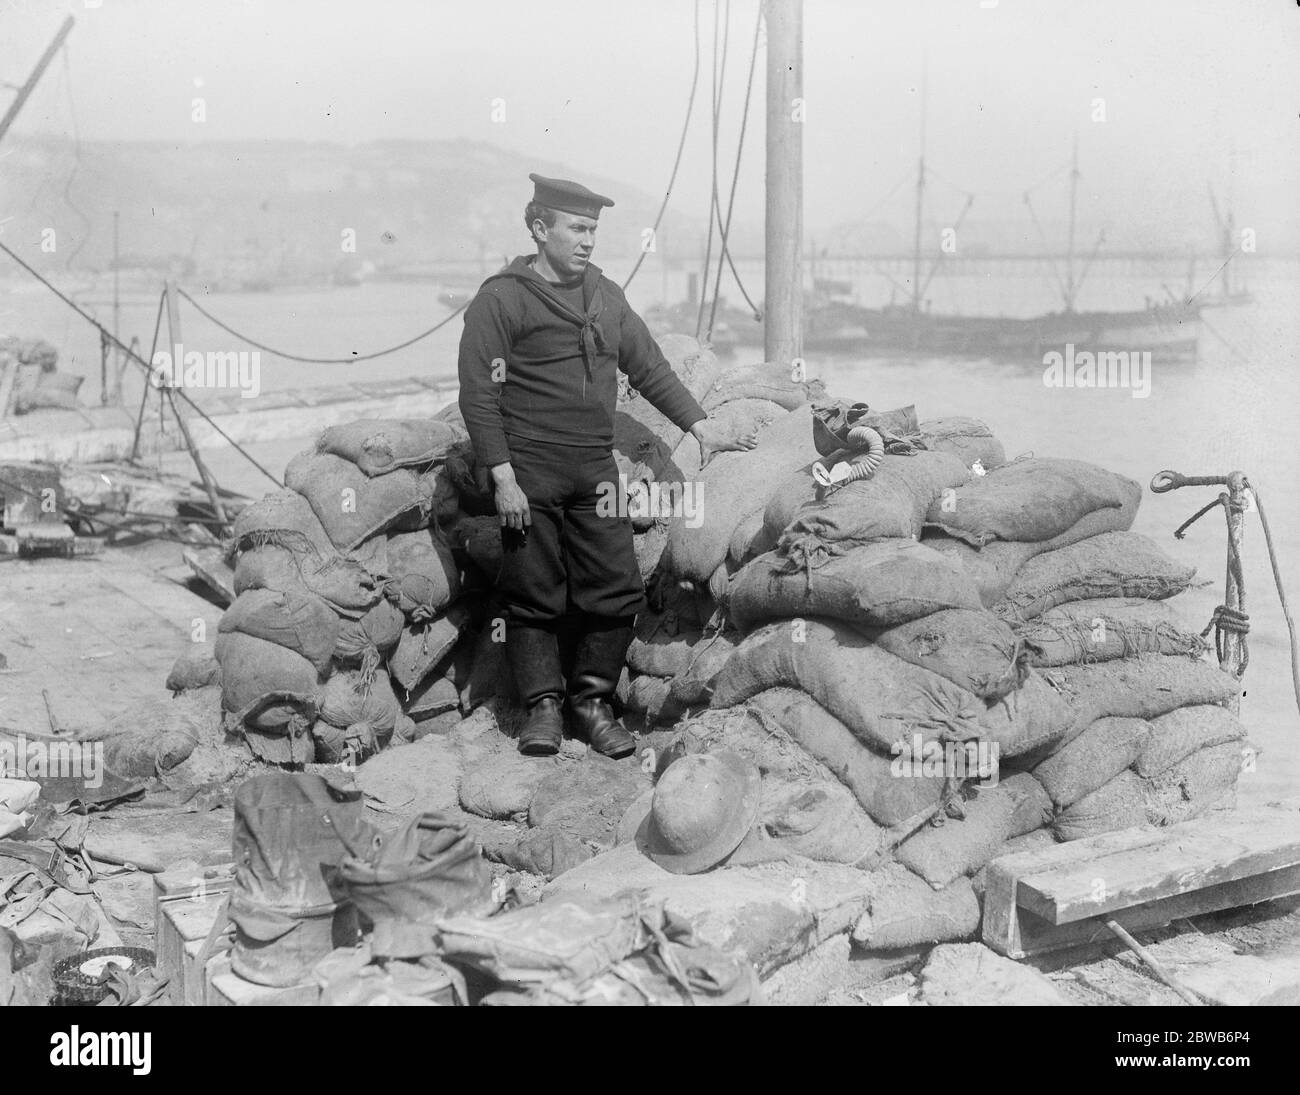 The Great Naval raid on Zeebrugge . A crewman in a sandbagged position aboard HMS Vindictive , a British protected cruiser . On 23 April , 1918 she was in a fierce action at Zeebrugge when she went alongside the Mole and her upperworks were badly damaged . 1918 Stock Photo